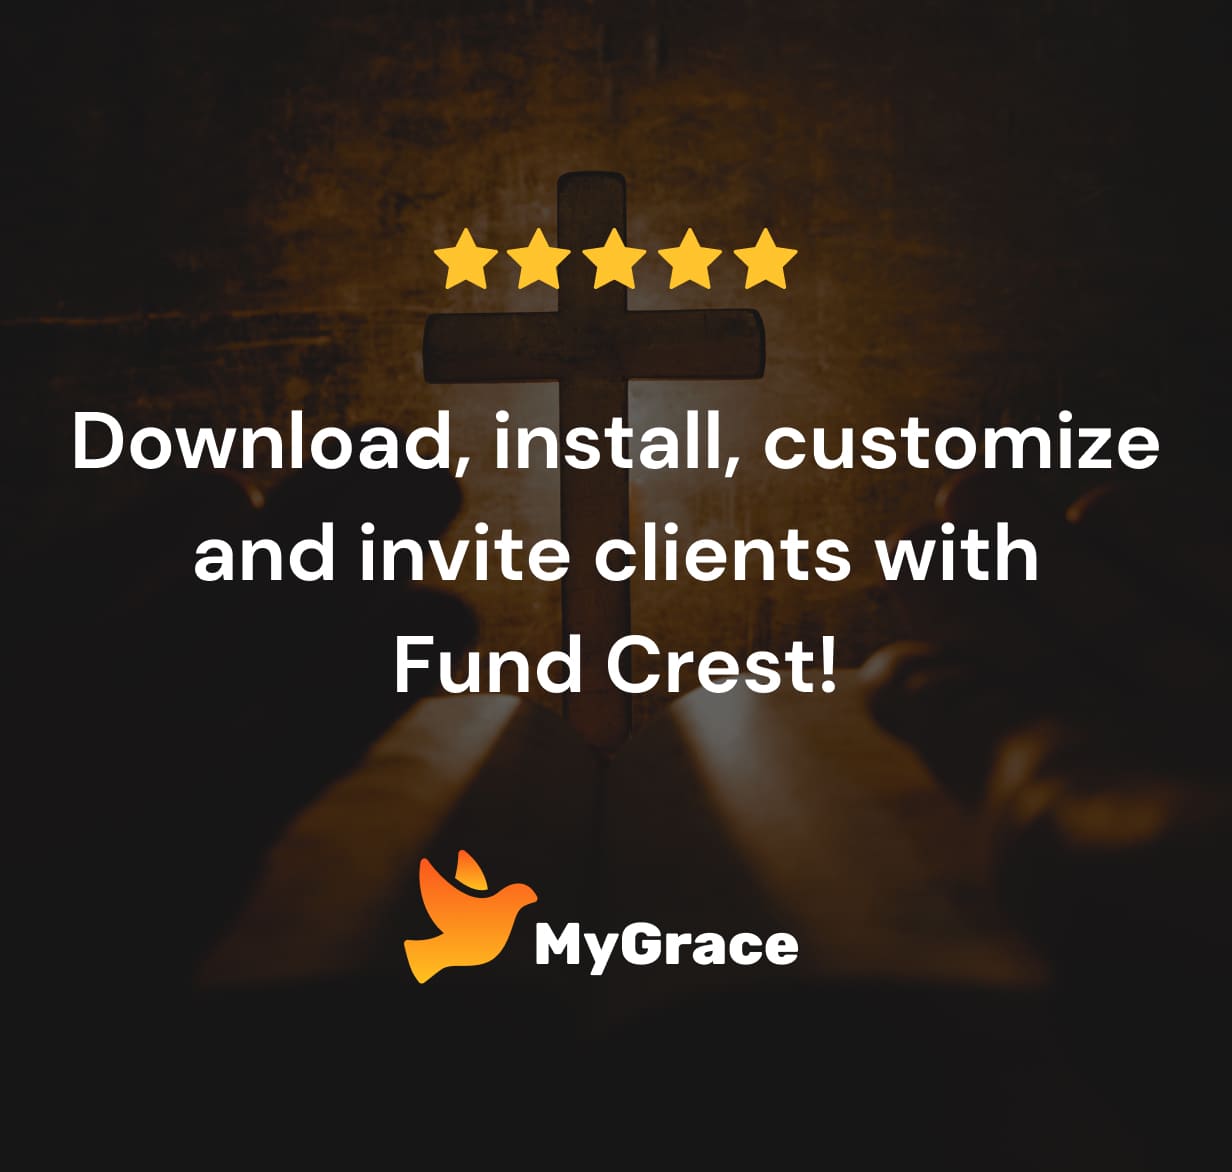 Download, install, customize and invite clients with Fund Crest.